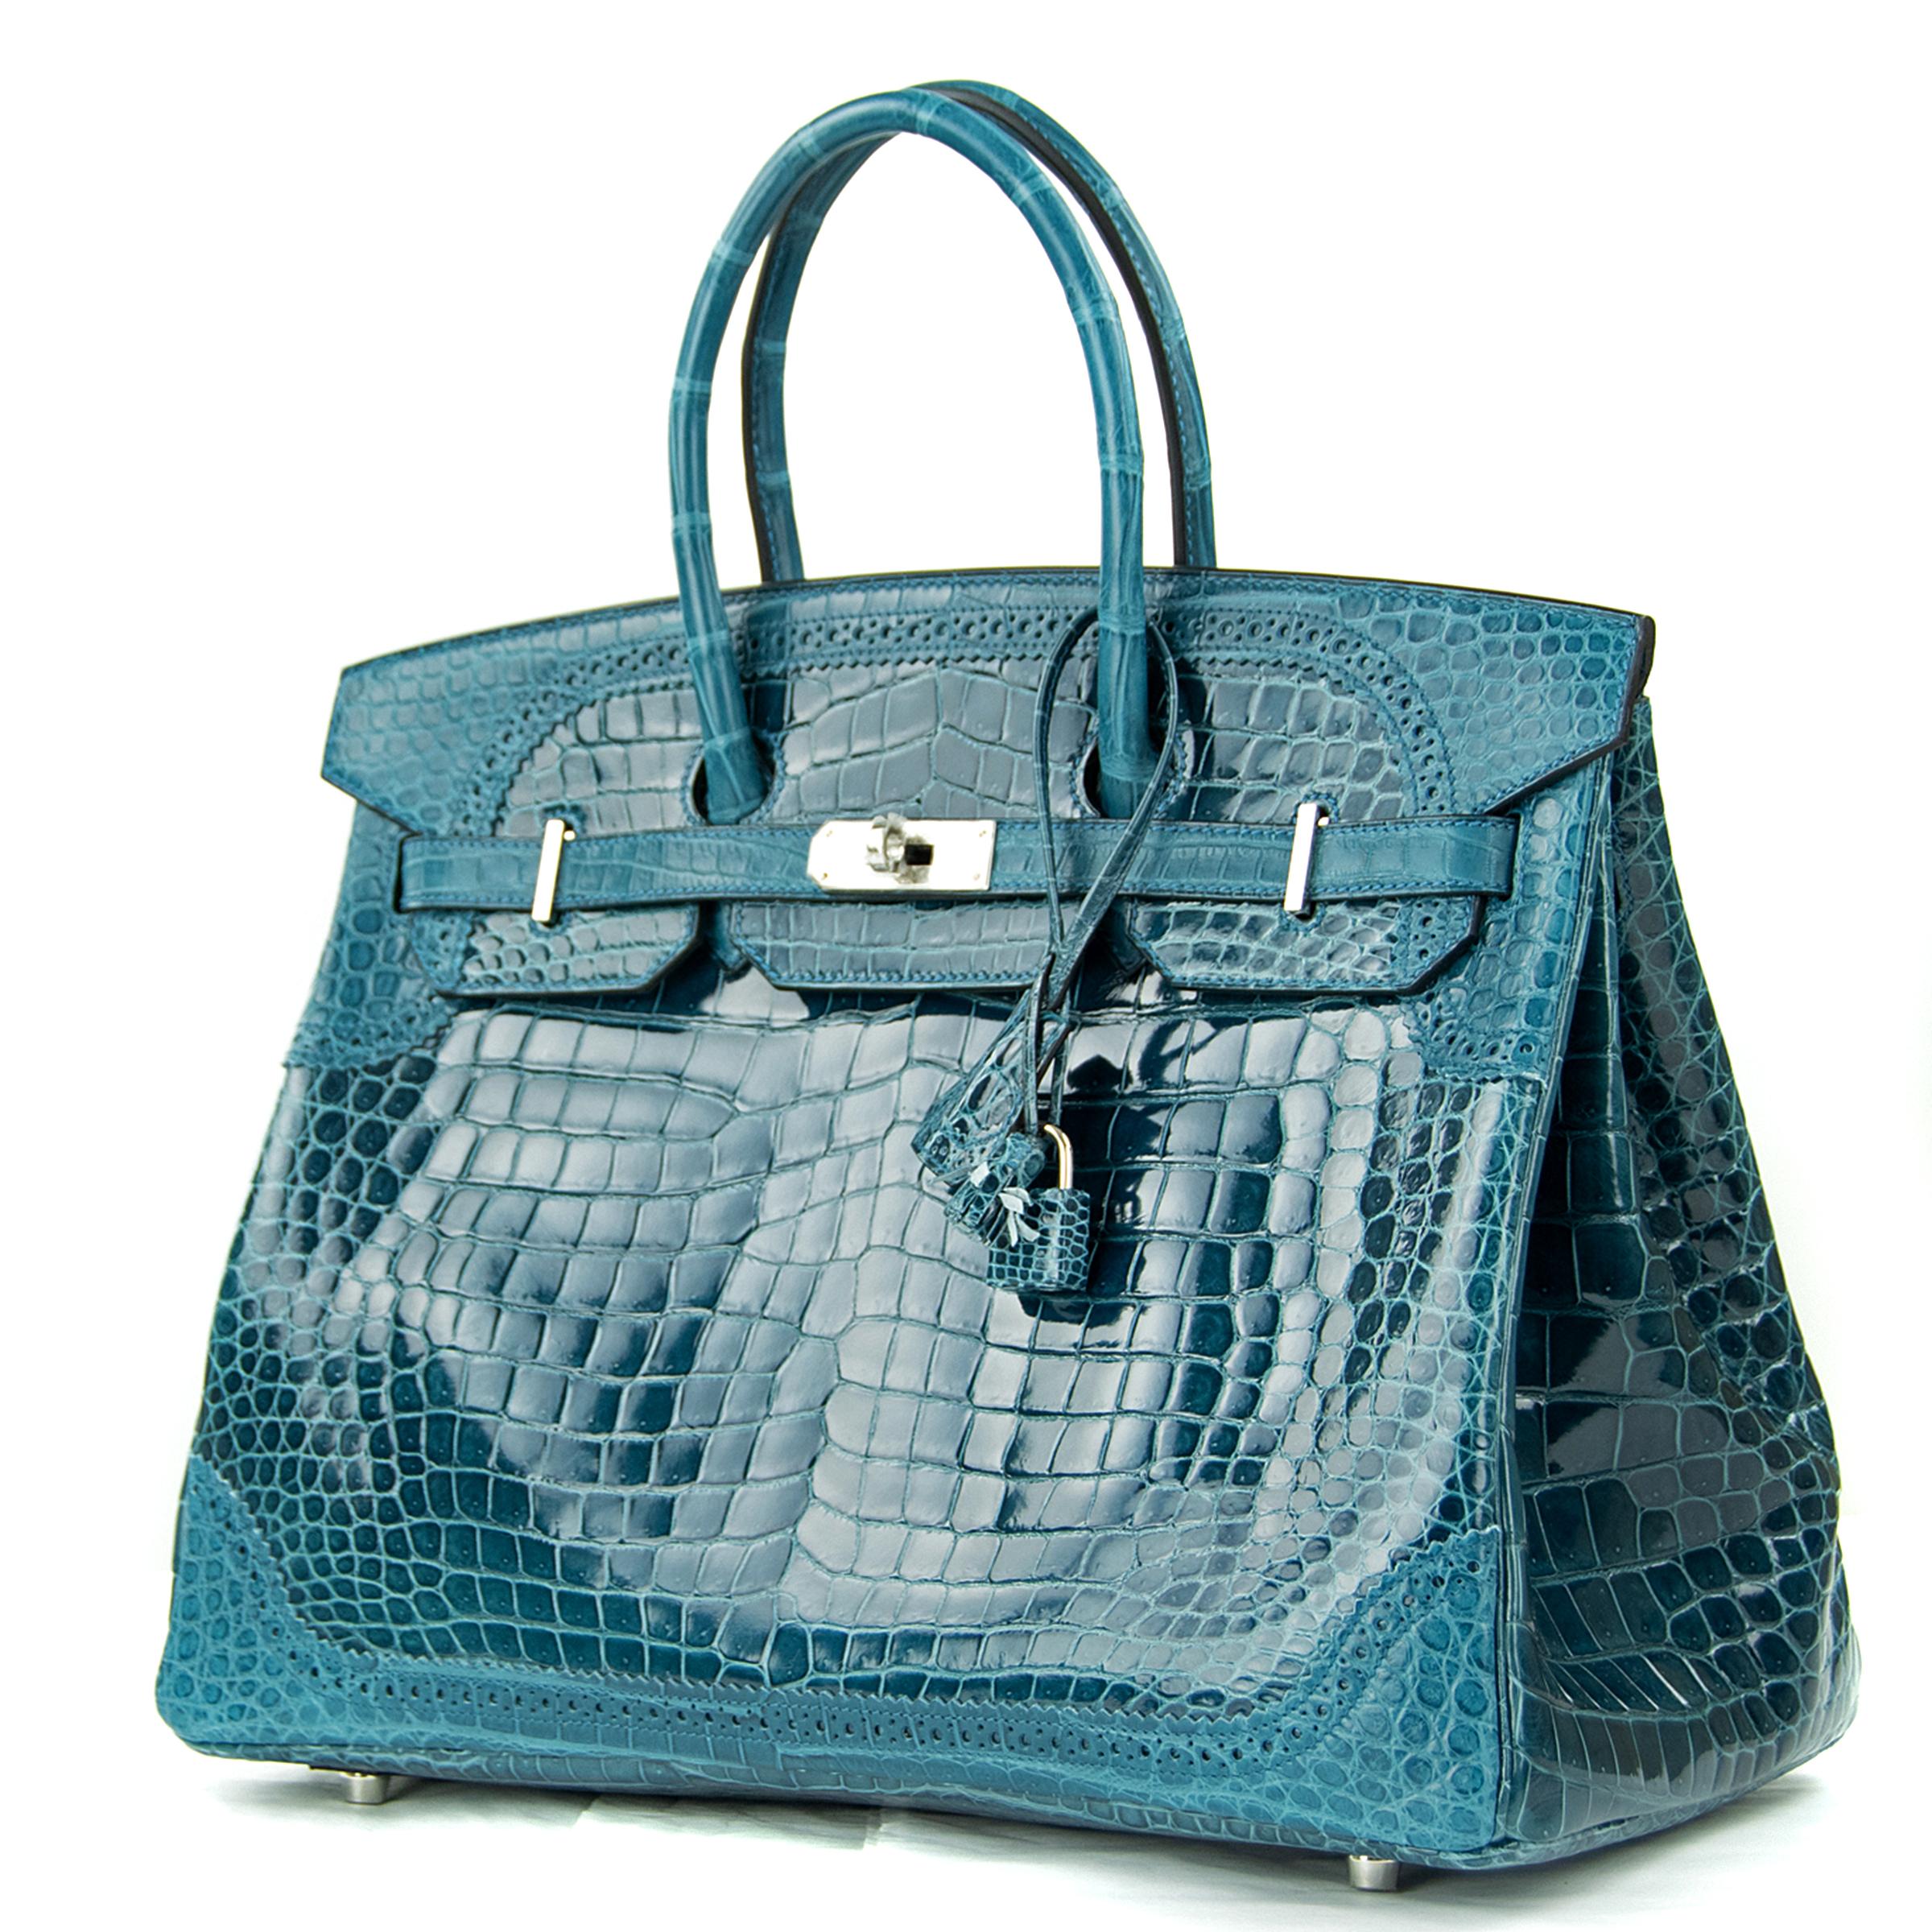 Limited Edition Hermes Porosus Crocodile 35cm Ghillies Birkin in Shiny and Matte Bleu Colvert. This iconic special order Hermes Birkin bag is timeless and chic. Fresh and crisp with palladium hardware.  

    Condition: New or Never Used
    Made in